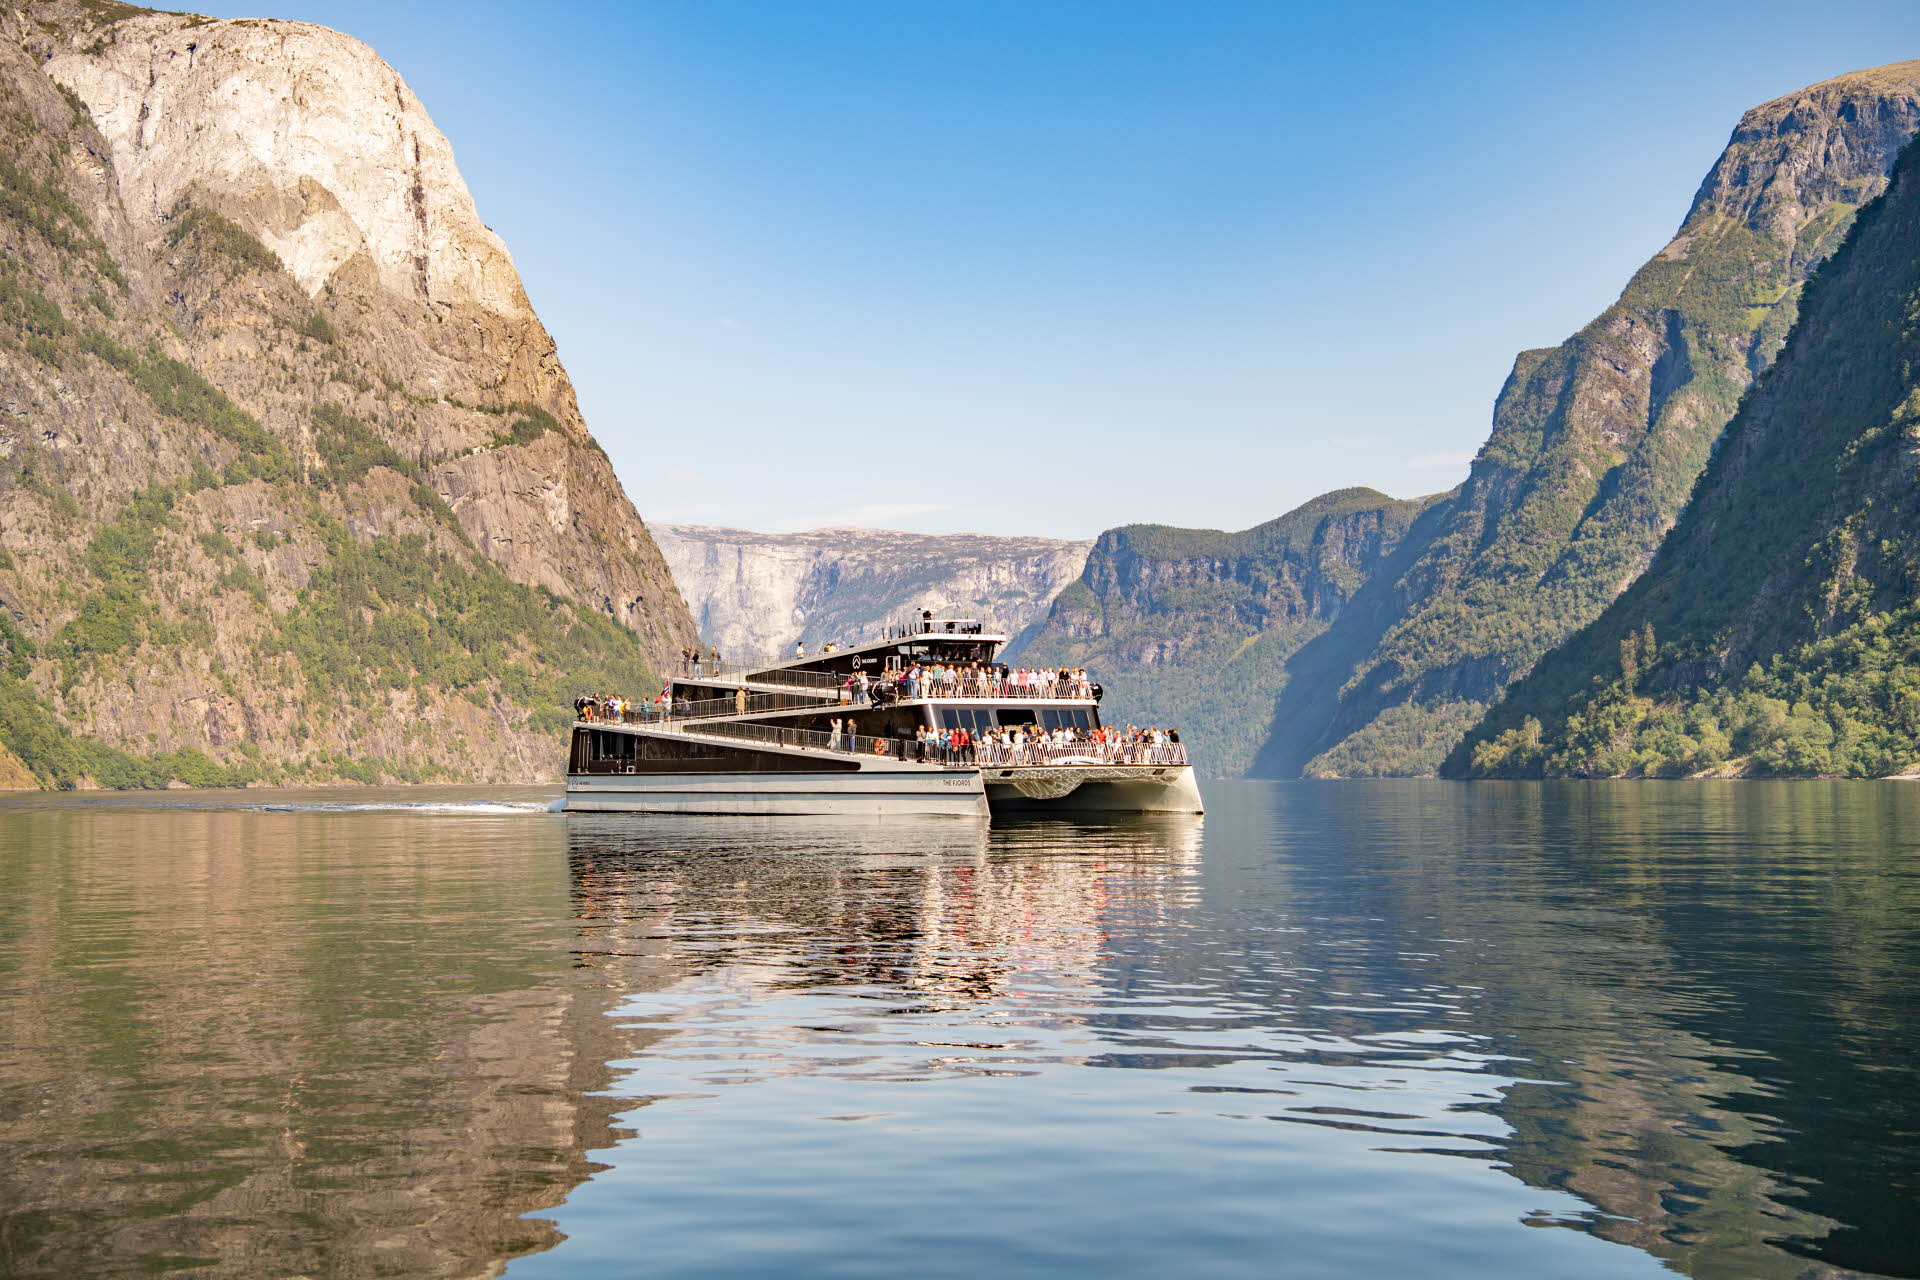 The electric boat Future of the Fjords sails silently on the Nærøyfjord